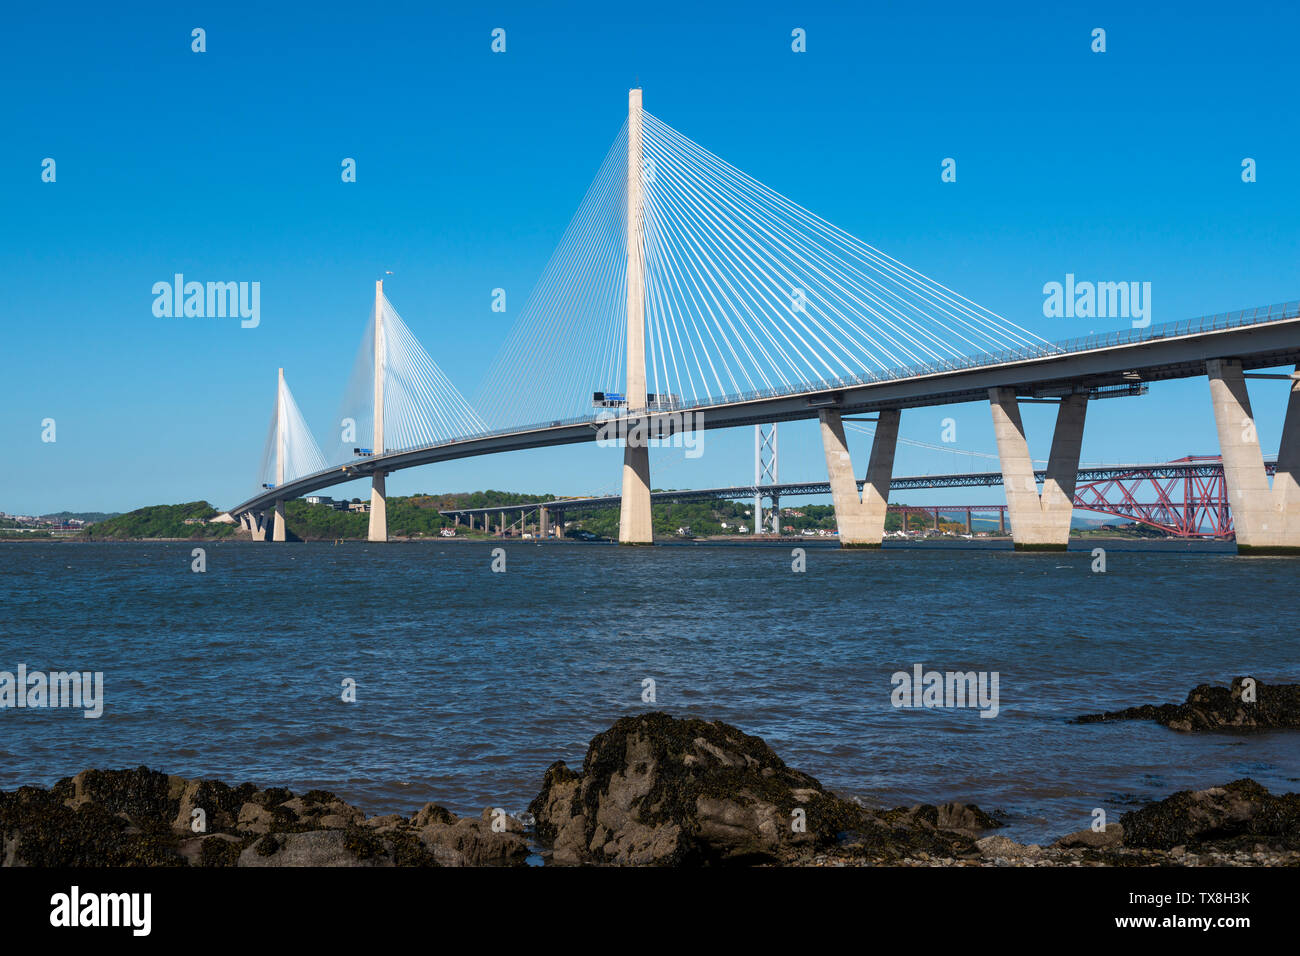 New Queensferry Crossing road bridge, with Forth Road Bridge and Forth Railway Bridge in background, viewed from South Queensferry, Scotland, UK Stock Photo